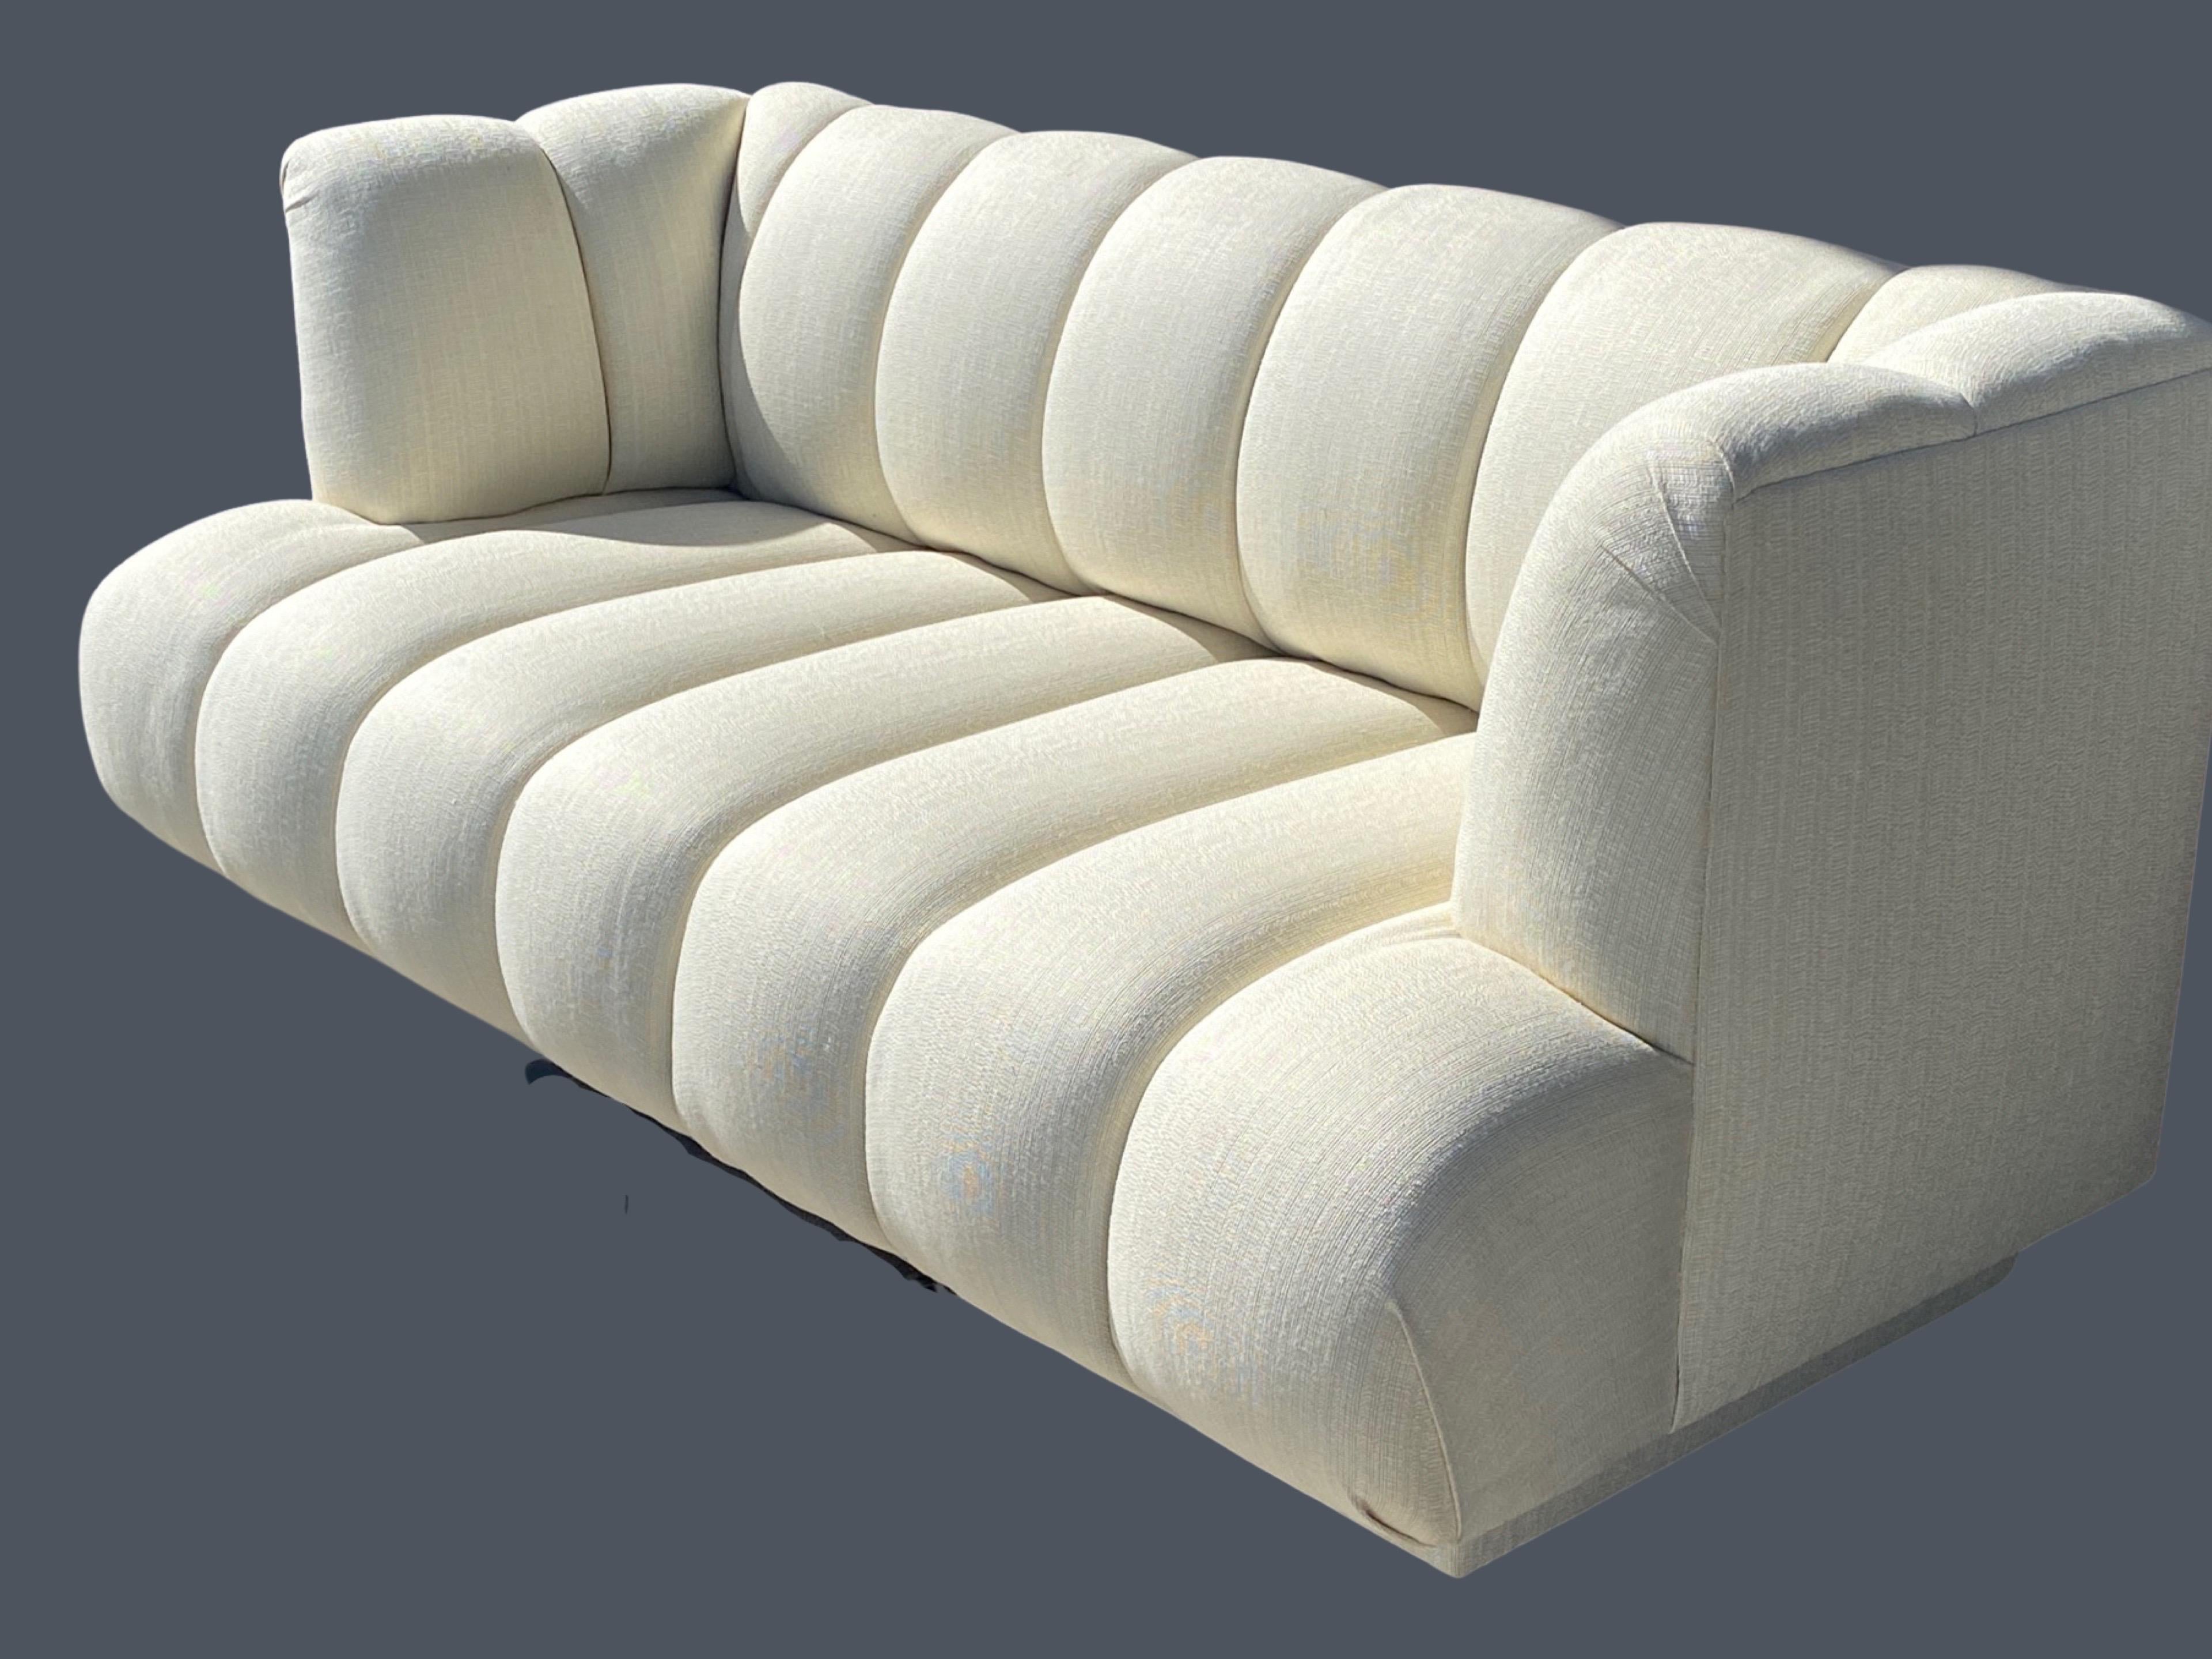 Steve Chase Iconic Channel Sofa From Celebrity Estate in New Creme Upholstery  For Sale 4